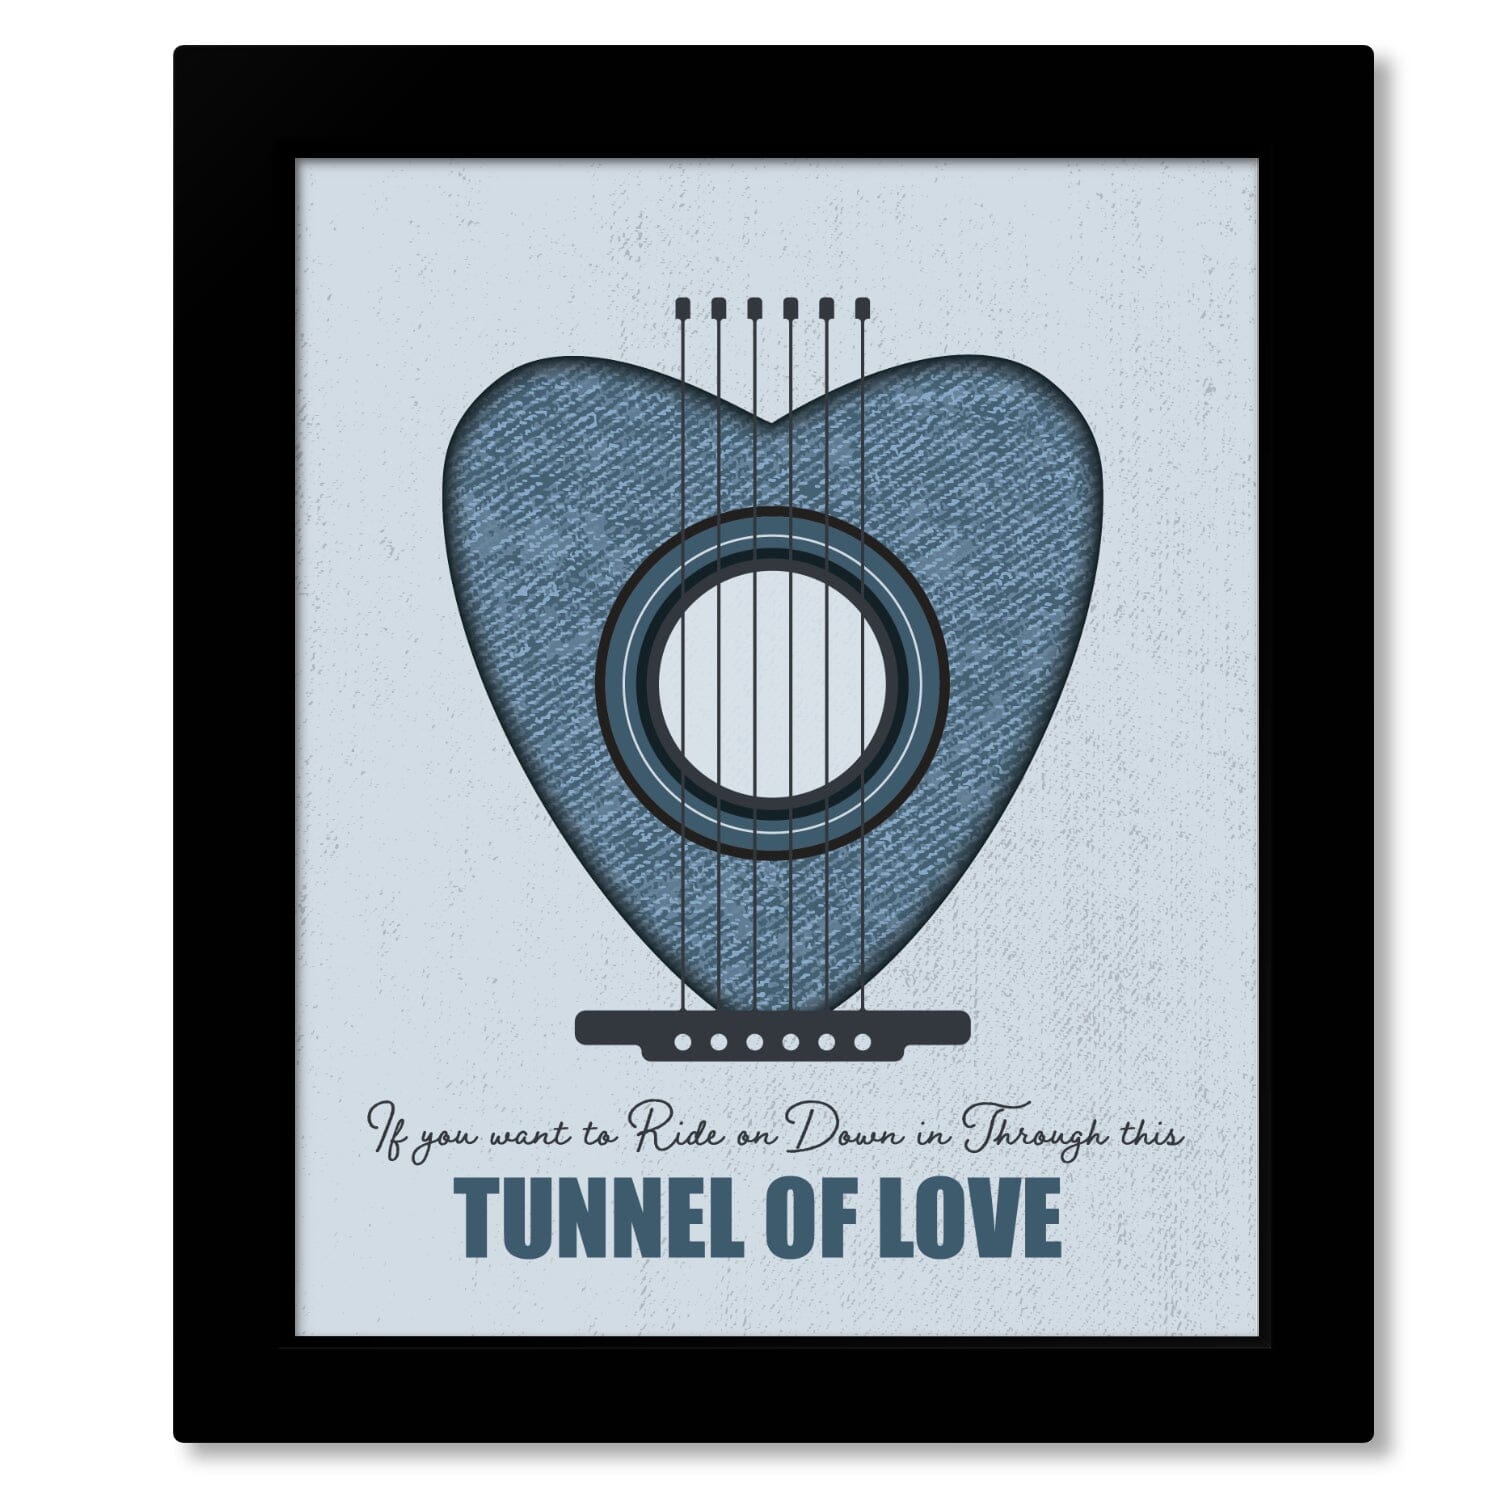 Tunnel of Love by Bruce Springsteen - Lyric Rock Music Art Song Lyrics Art Song Lyrics Art 8x10 Framed Print (without Mat) 